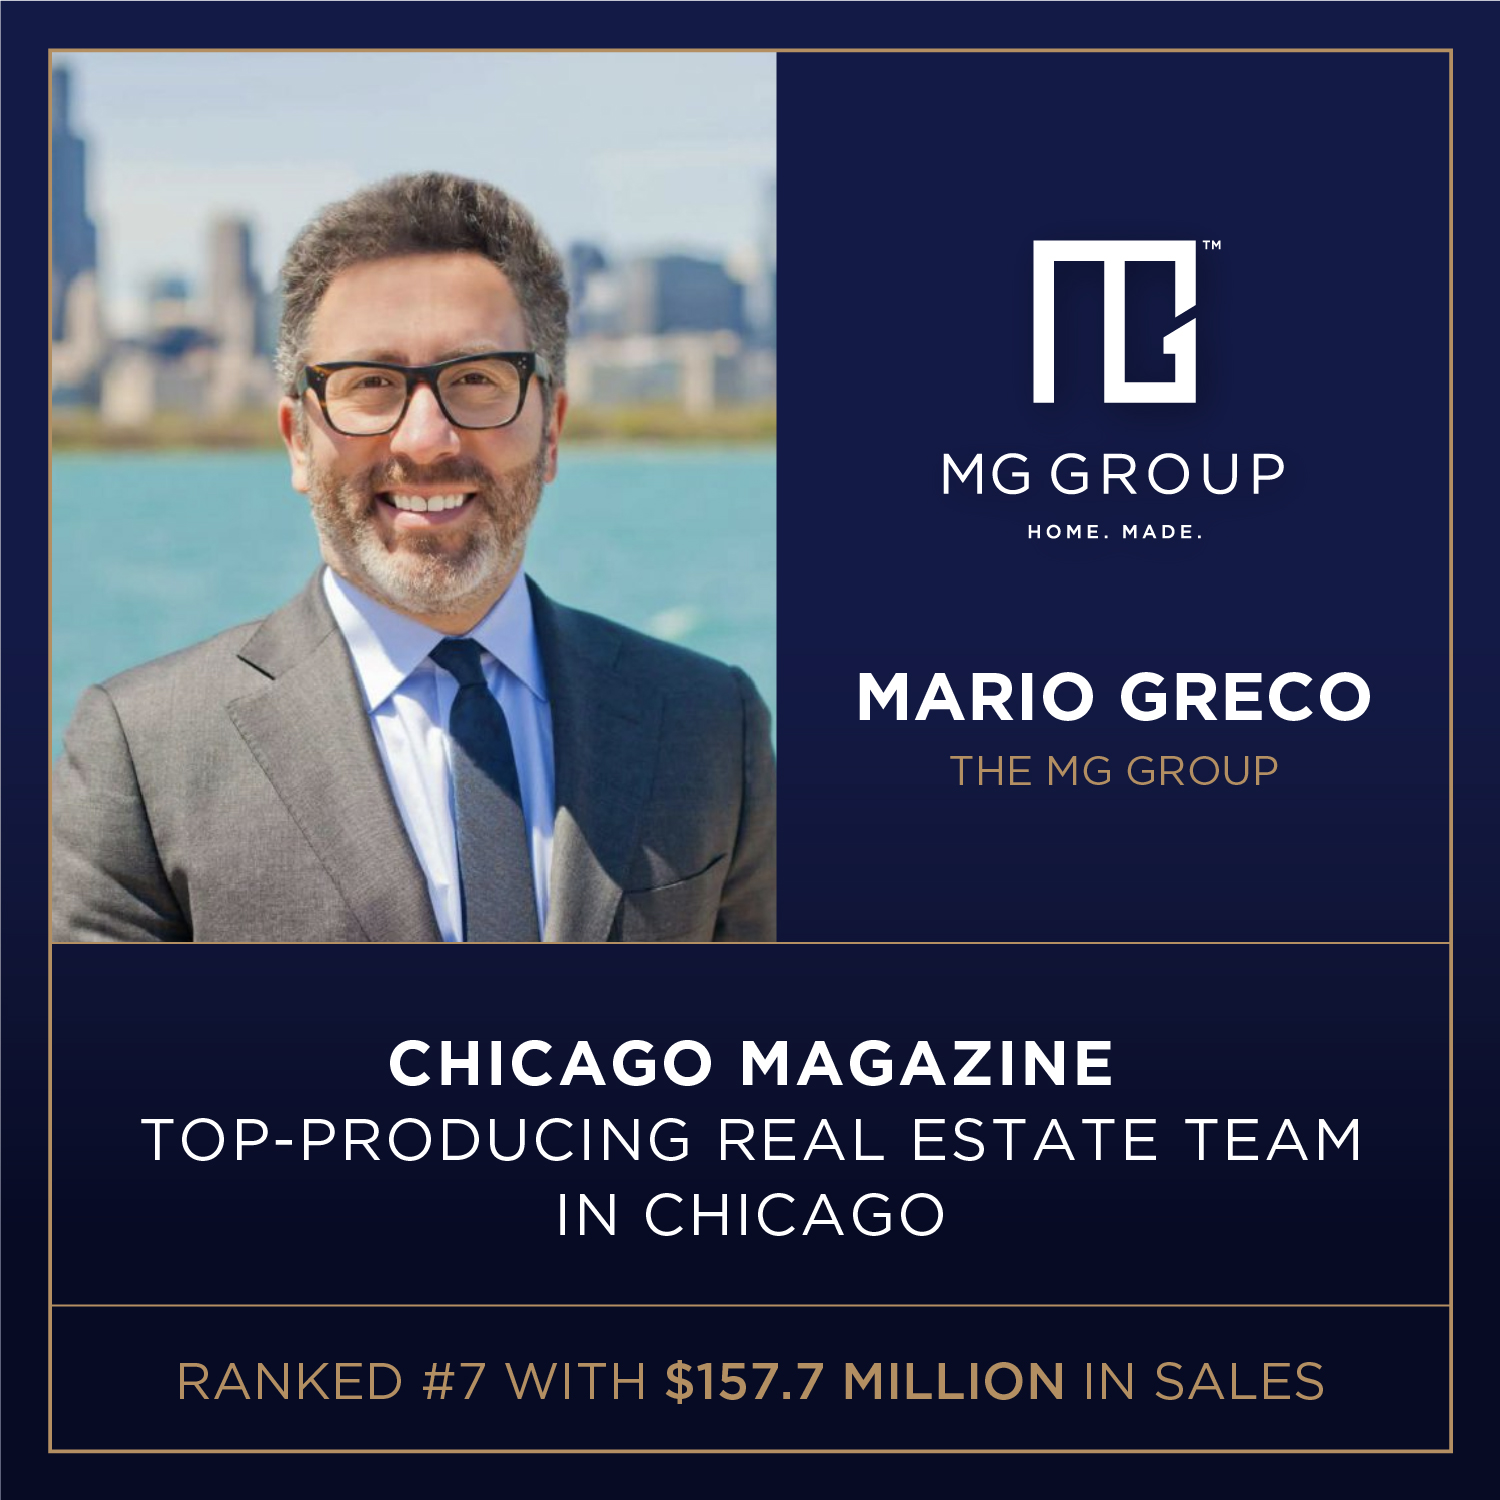 Chicago Magazine ranks MG Group as #7 best top-producing real estate team in the Chicago area